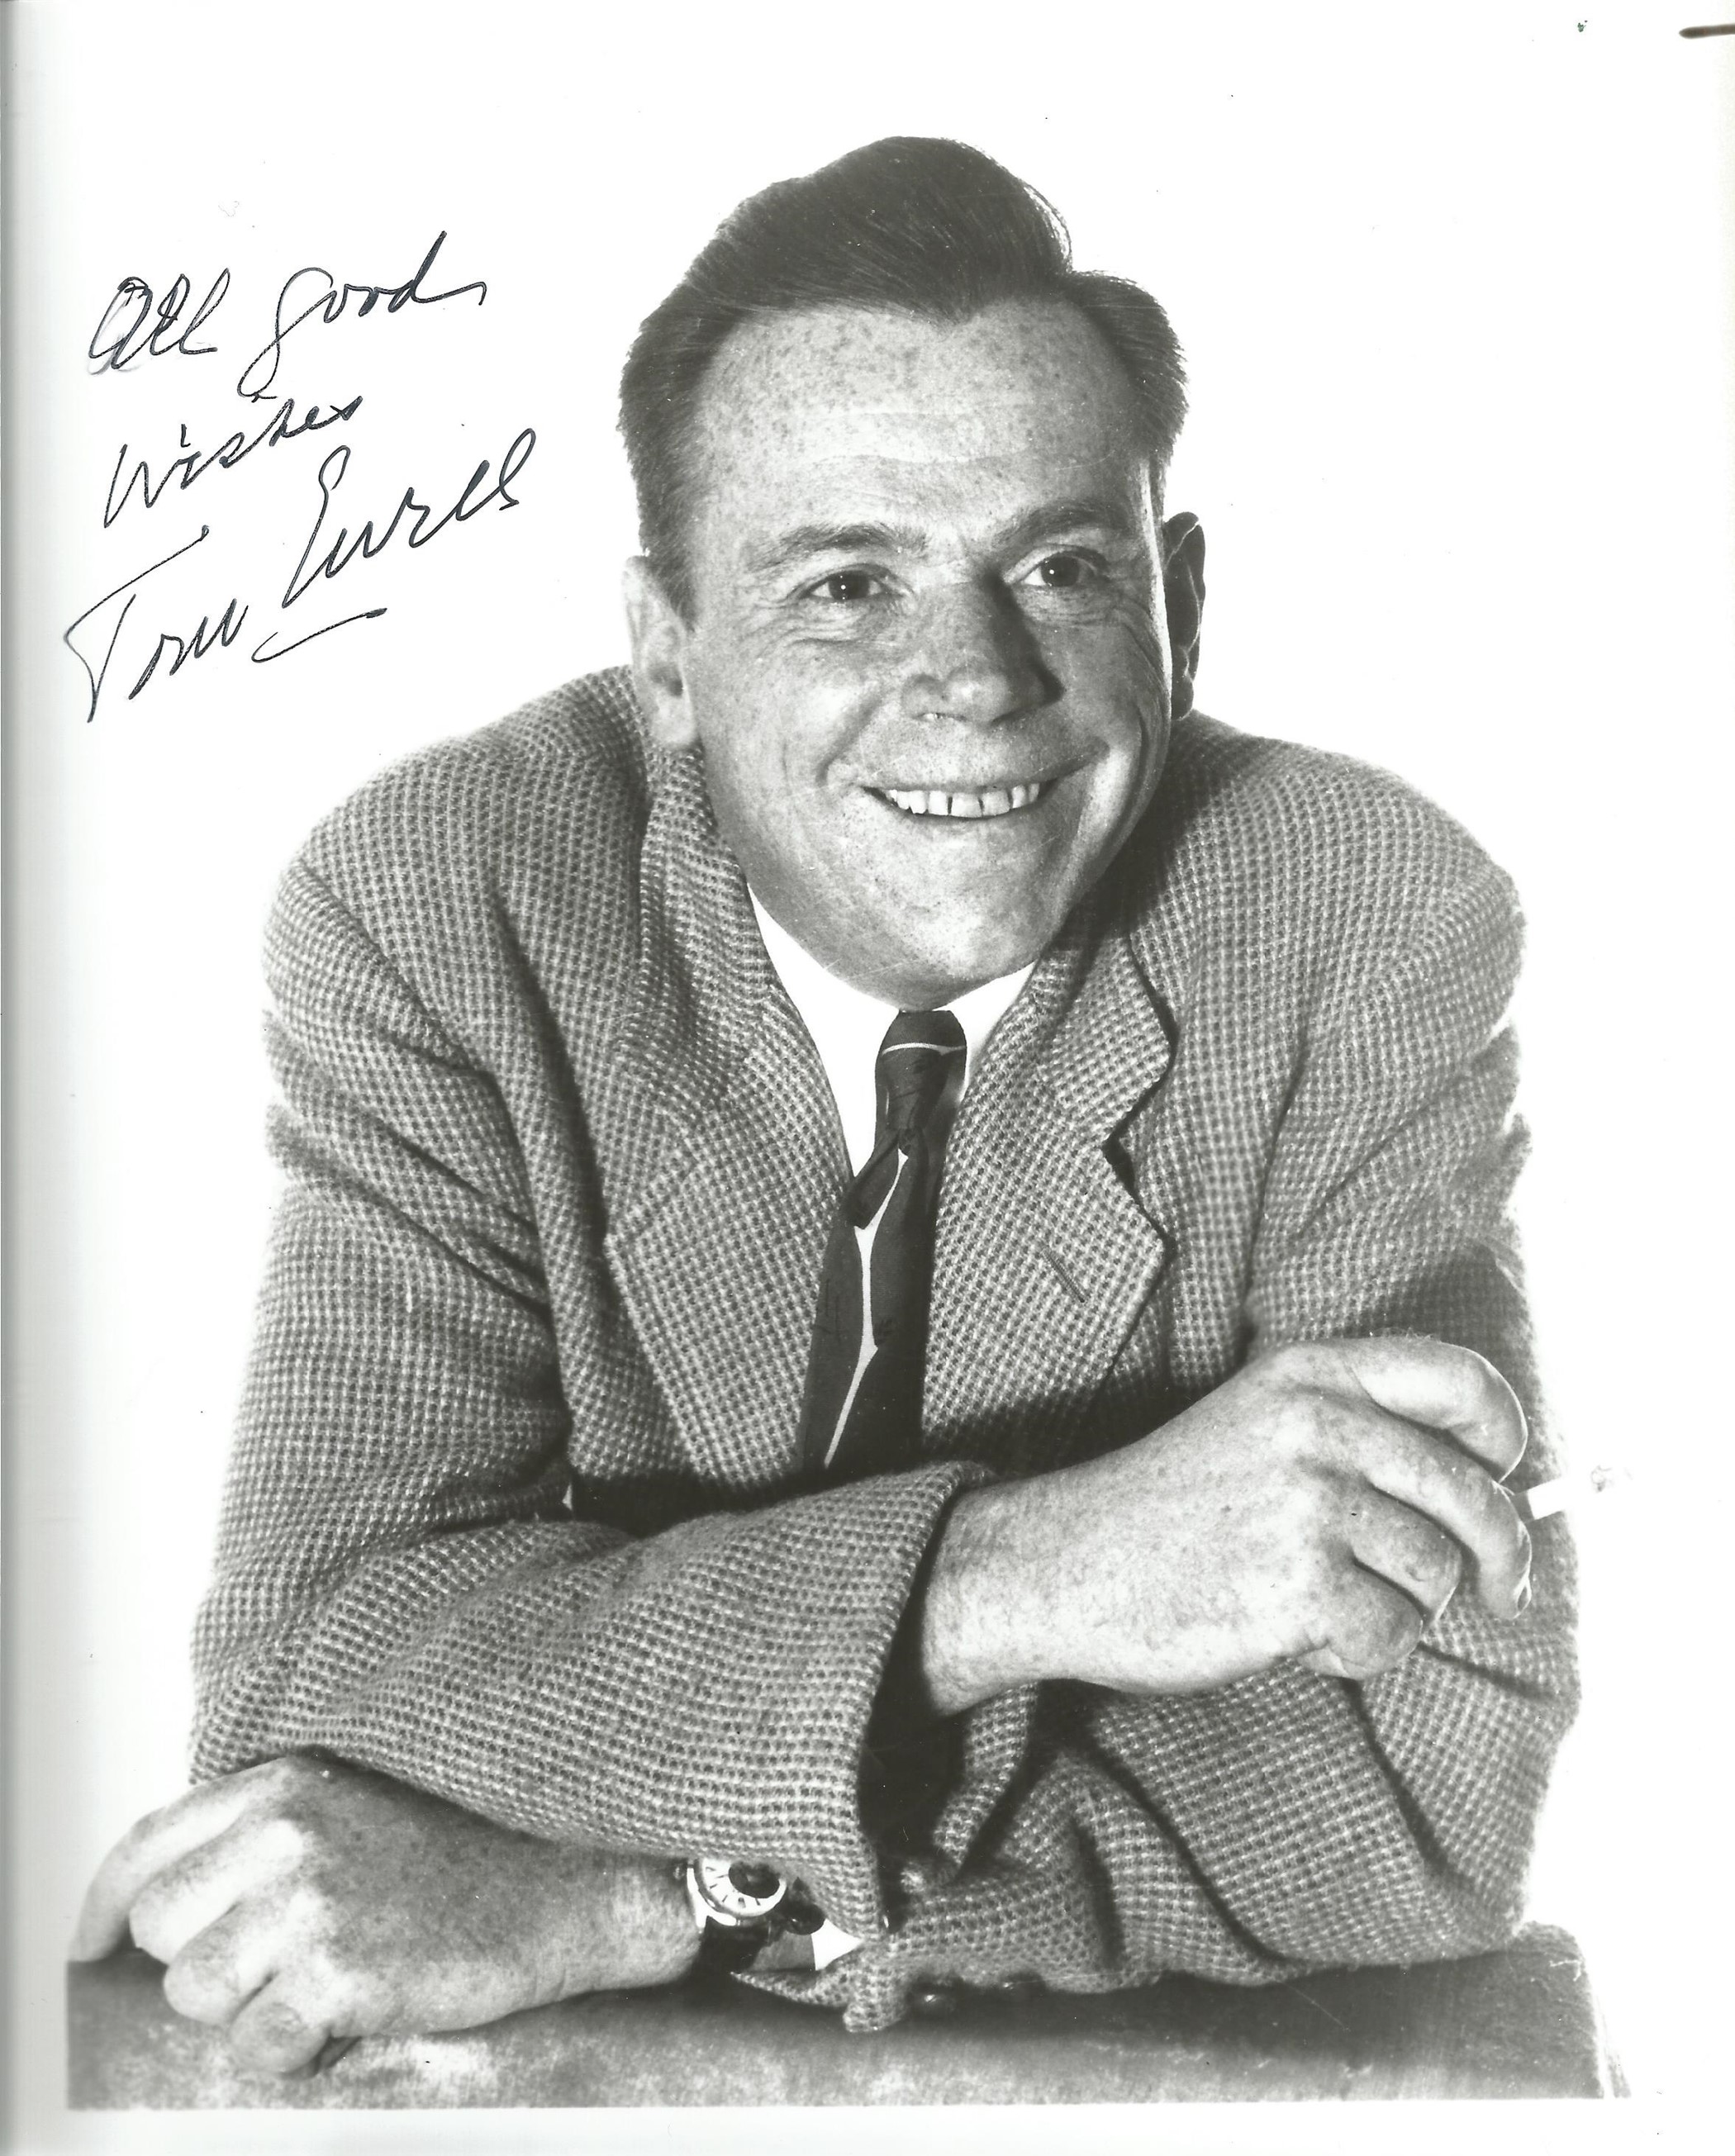 Tom Ewell signed 10 x 8 inch black and white photo. Ewell was an American film, stage and television